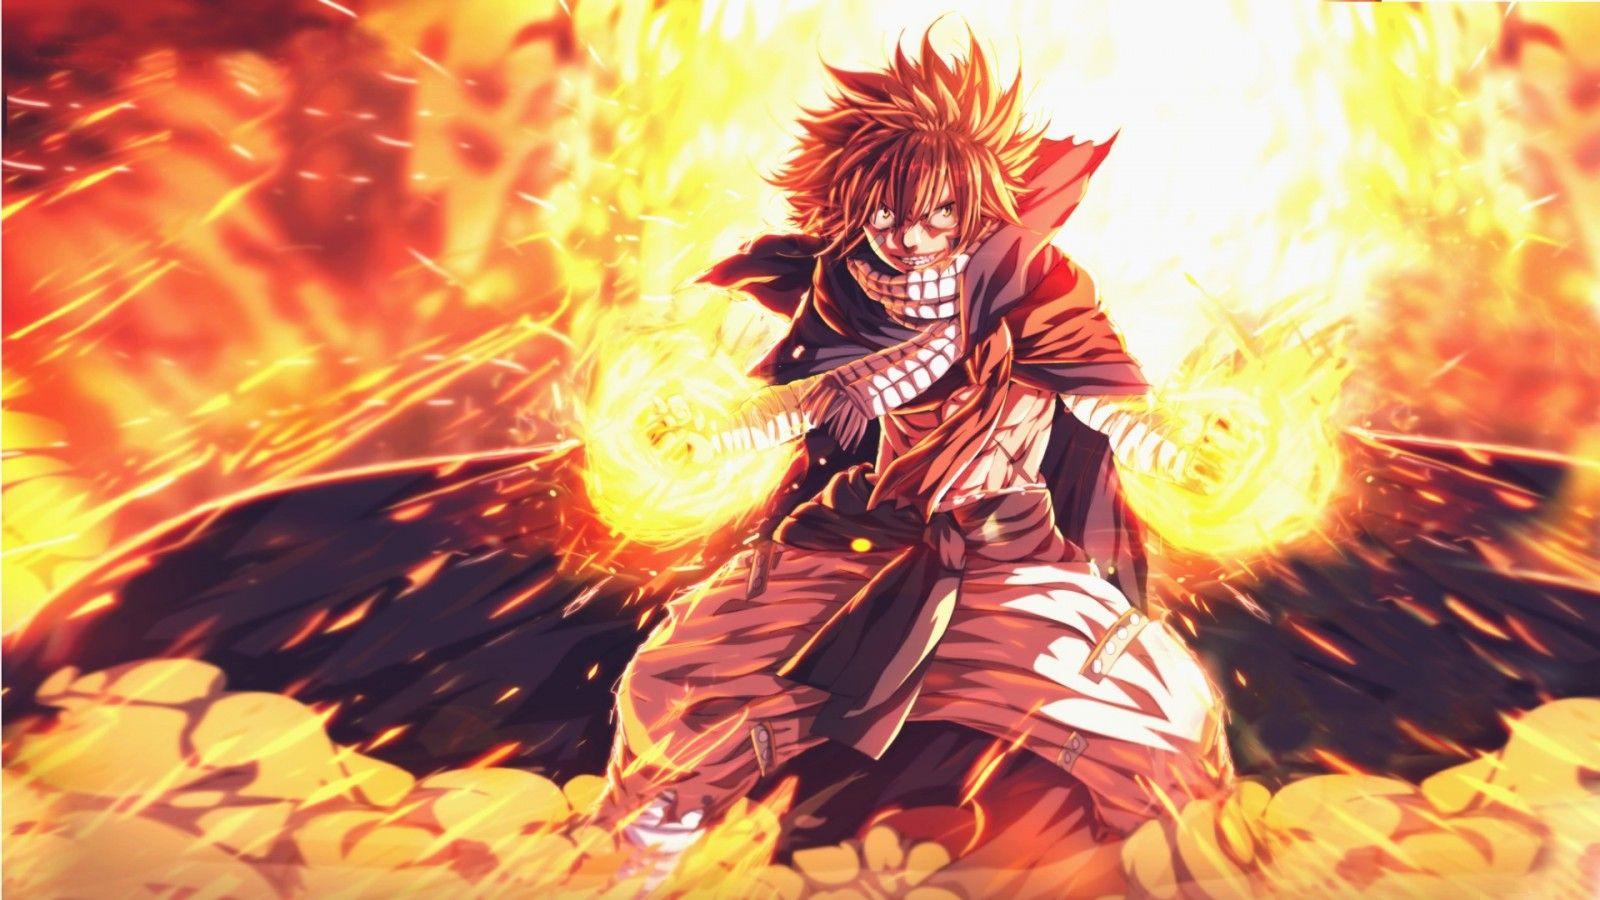 Natsu Dragneel Fairy Tail 3 Dragon Slayer Anime fairy tail manga  cartoon fictional Character png  PNGWing